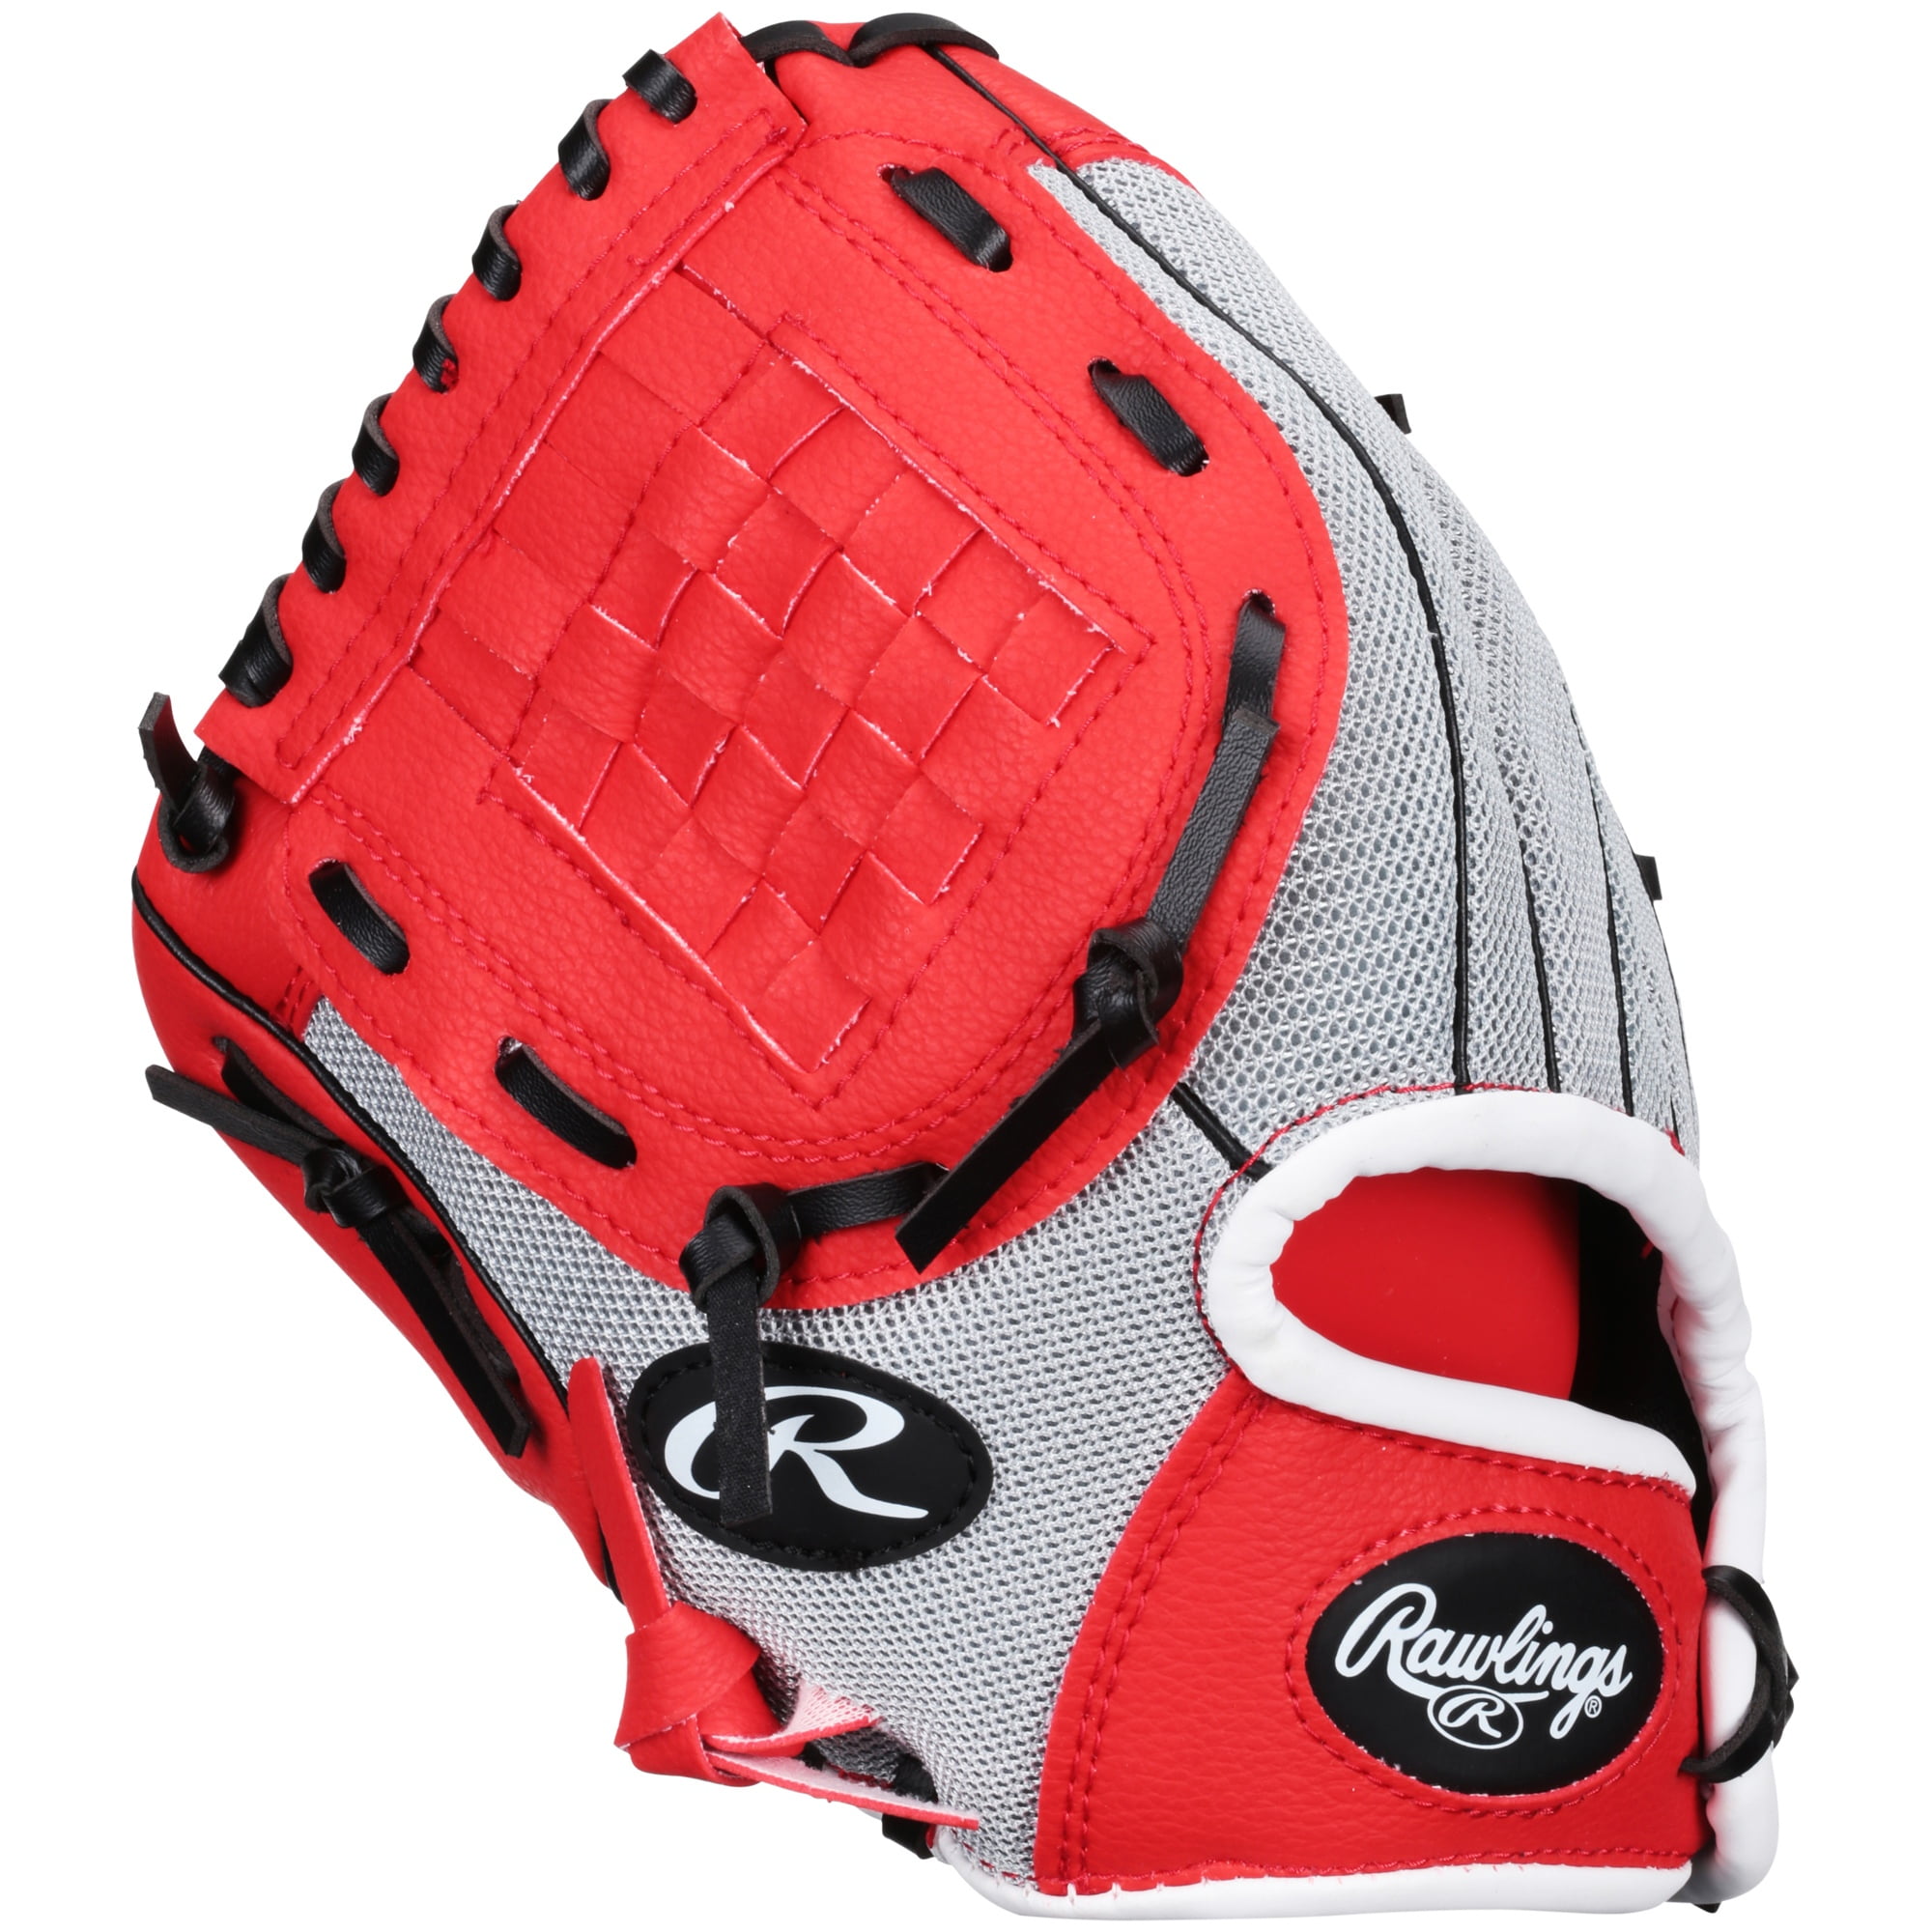 Rawlings Player Series PL10SS 10” LH Throw Tee Ball Glove New LEFTY 